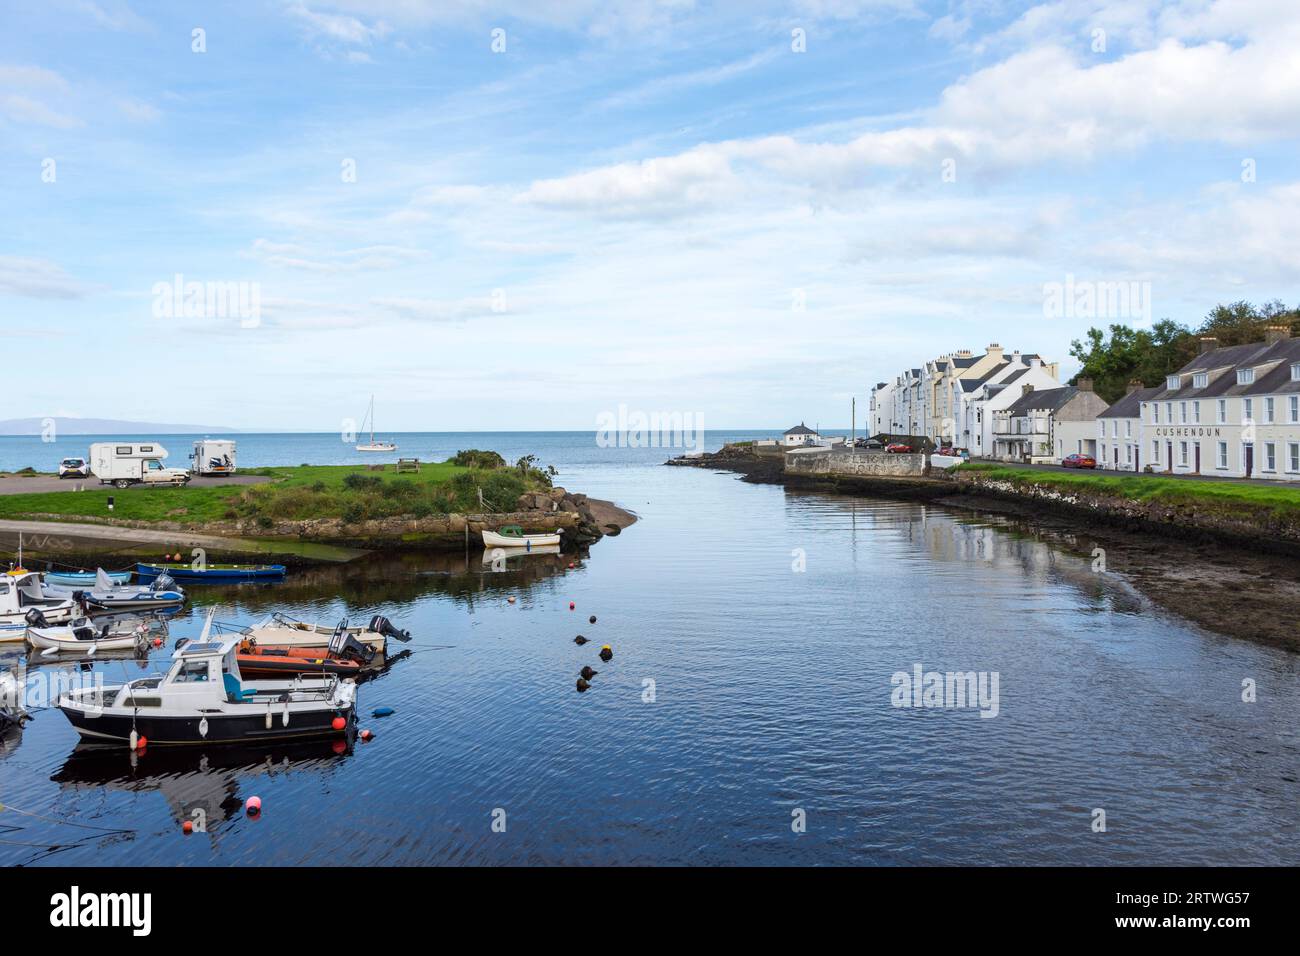 Cushendun is a small coastal village in County Antrim, Northern Ireland. It sits off the A2 coast road between Cushendall and Ballycastle. Stock Photo